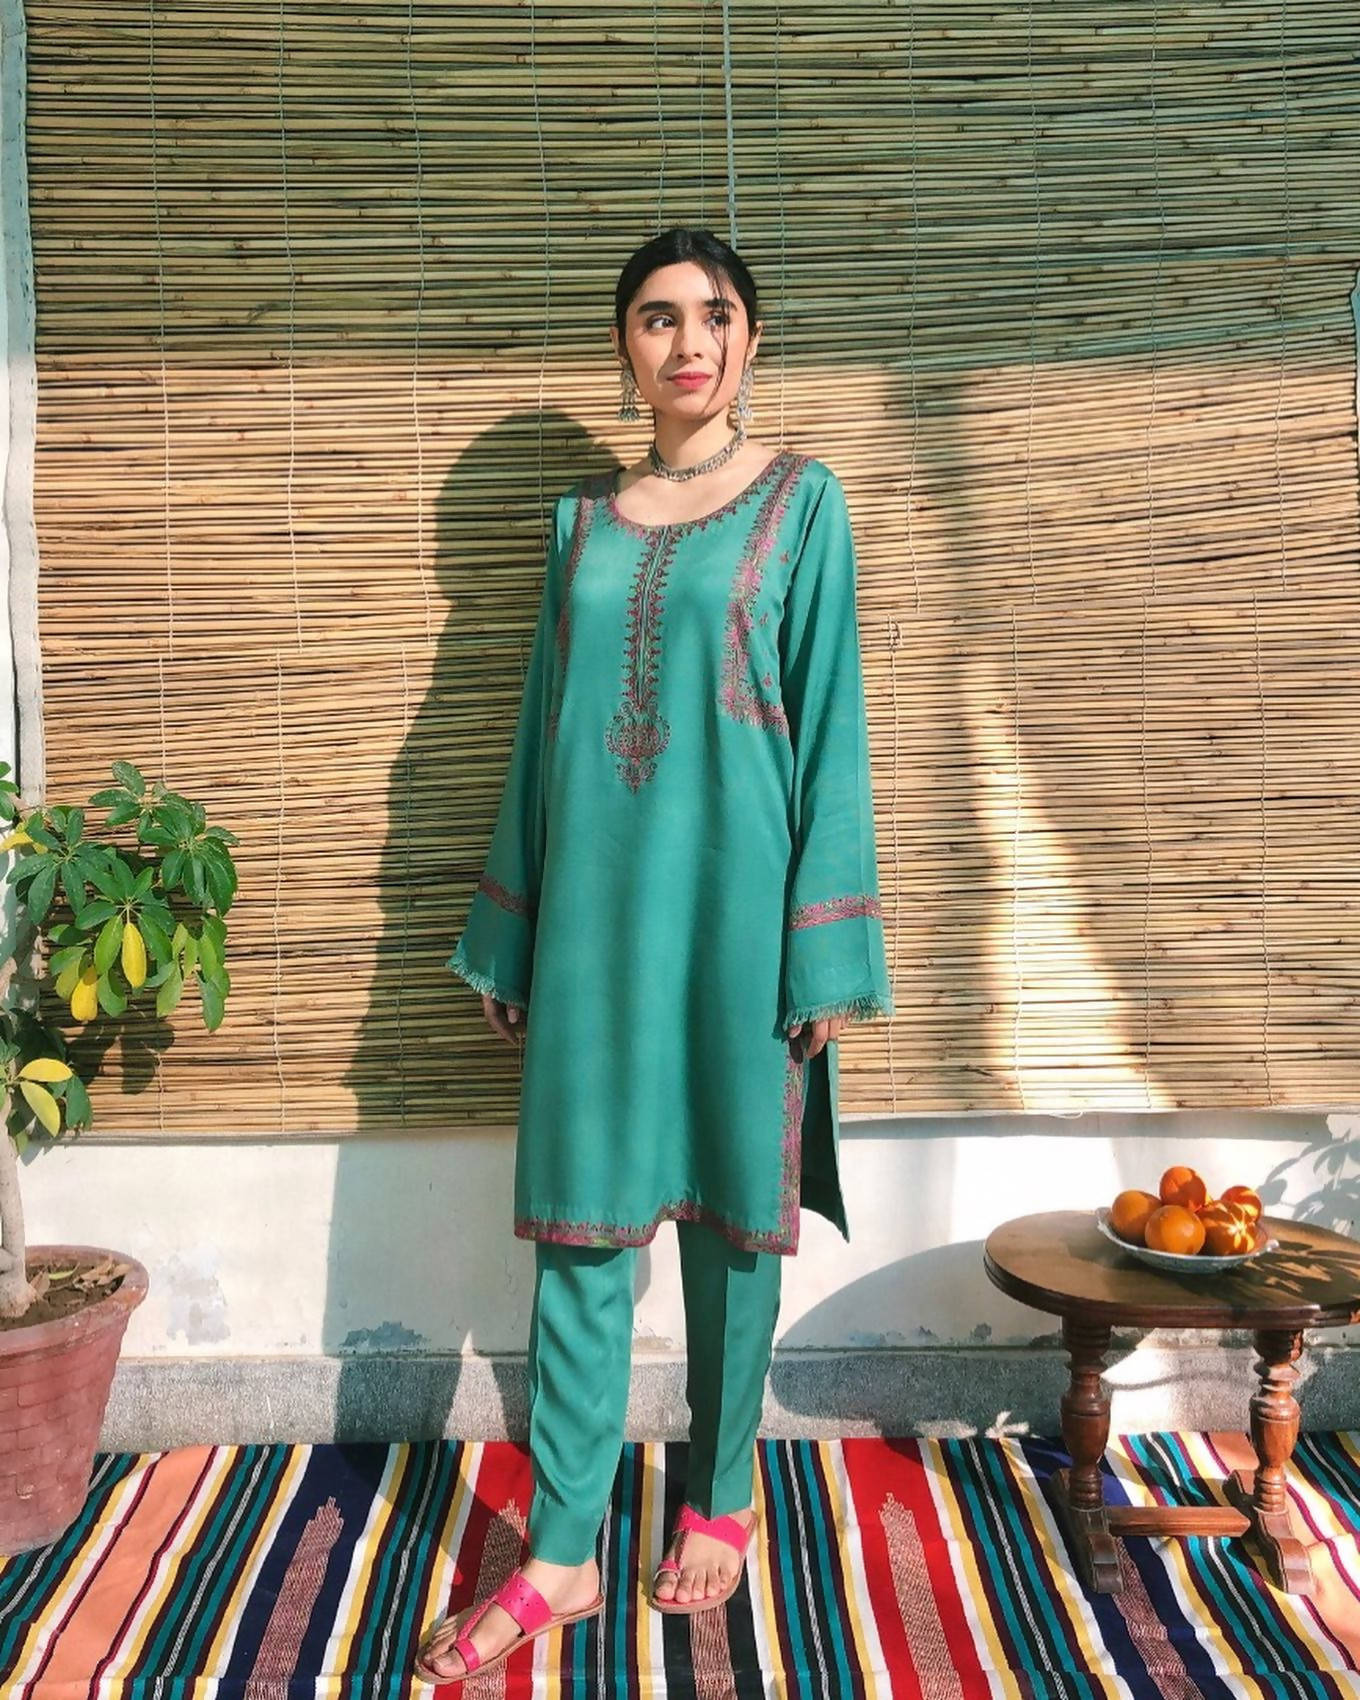 Sage Green 2-Piece Embroidered Suit